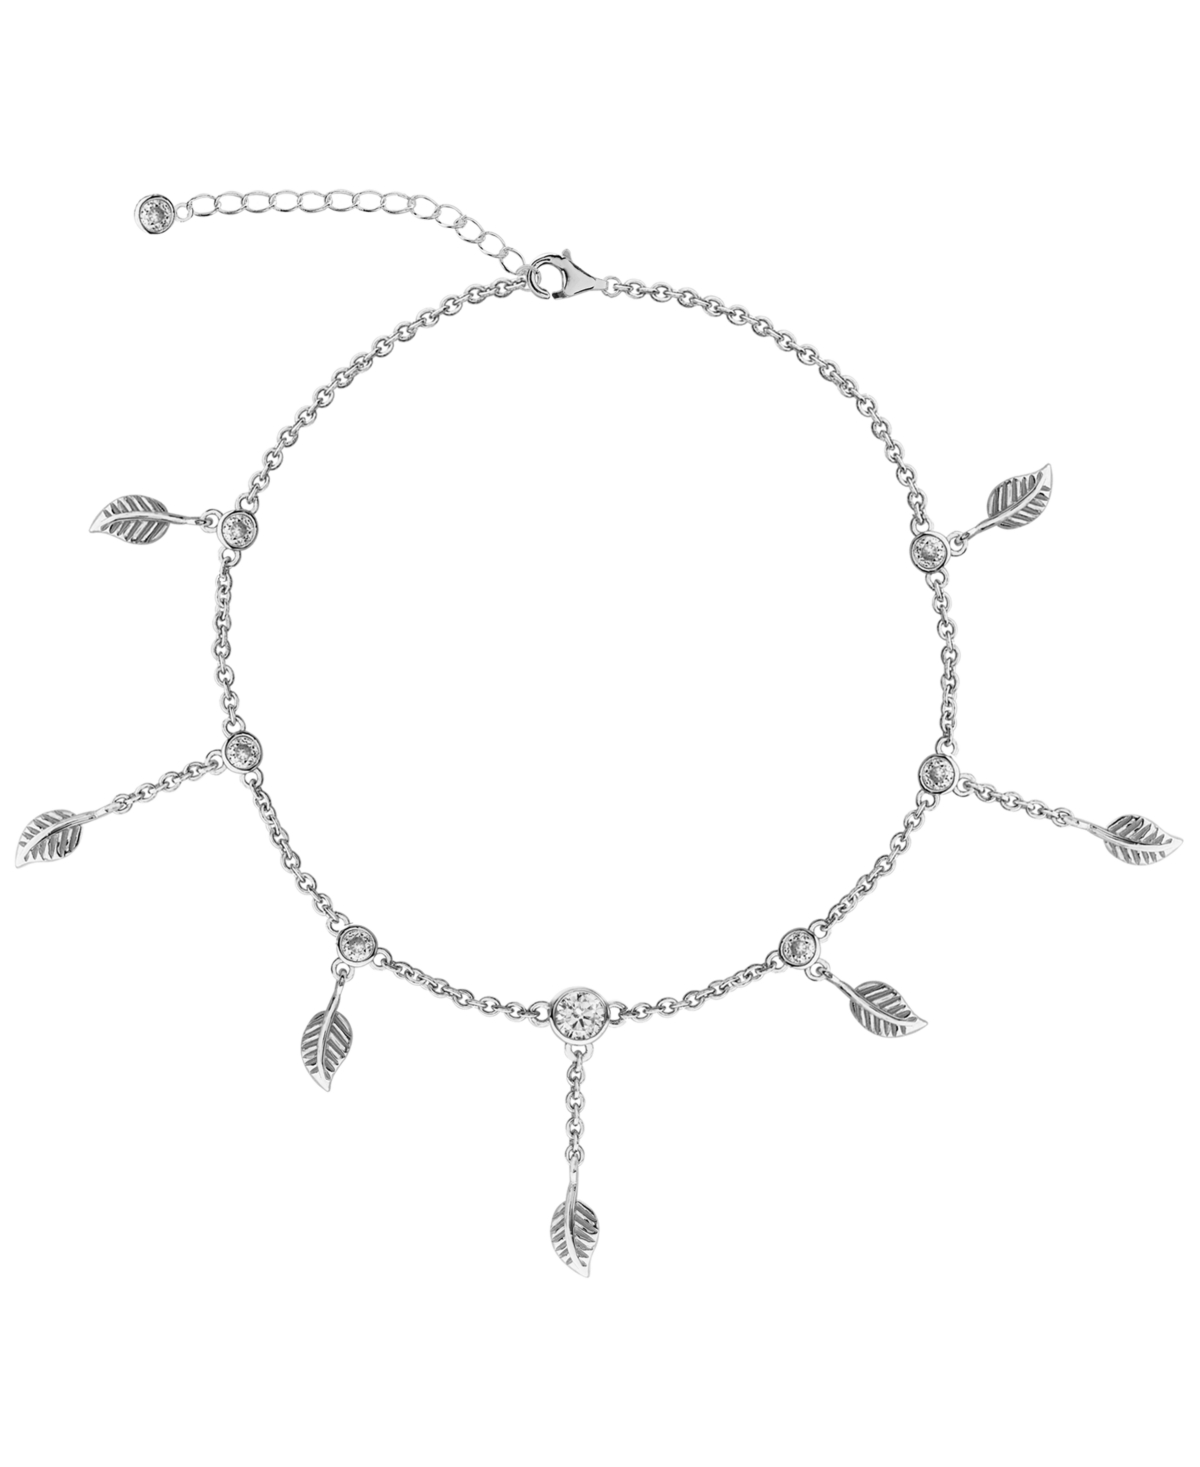 Bodifine Cubic Zirconia Leaves Sterling Silver-Tone Anklet - Silver